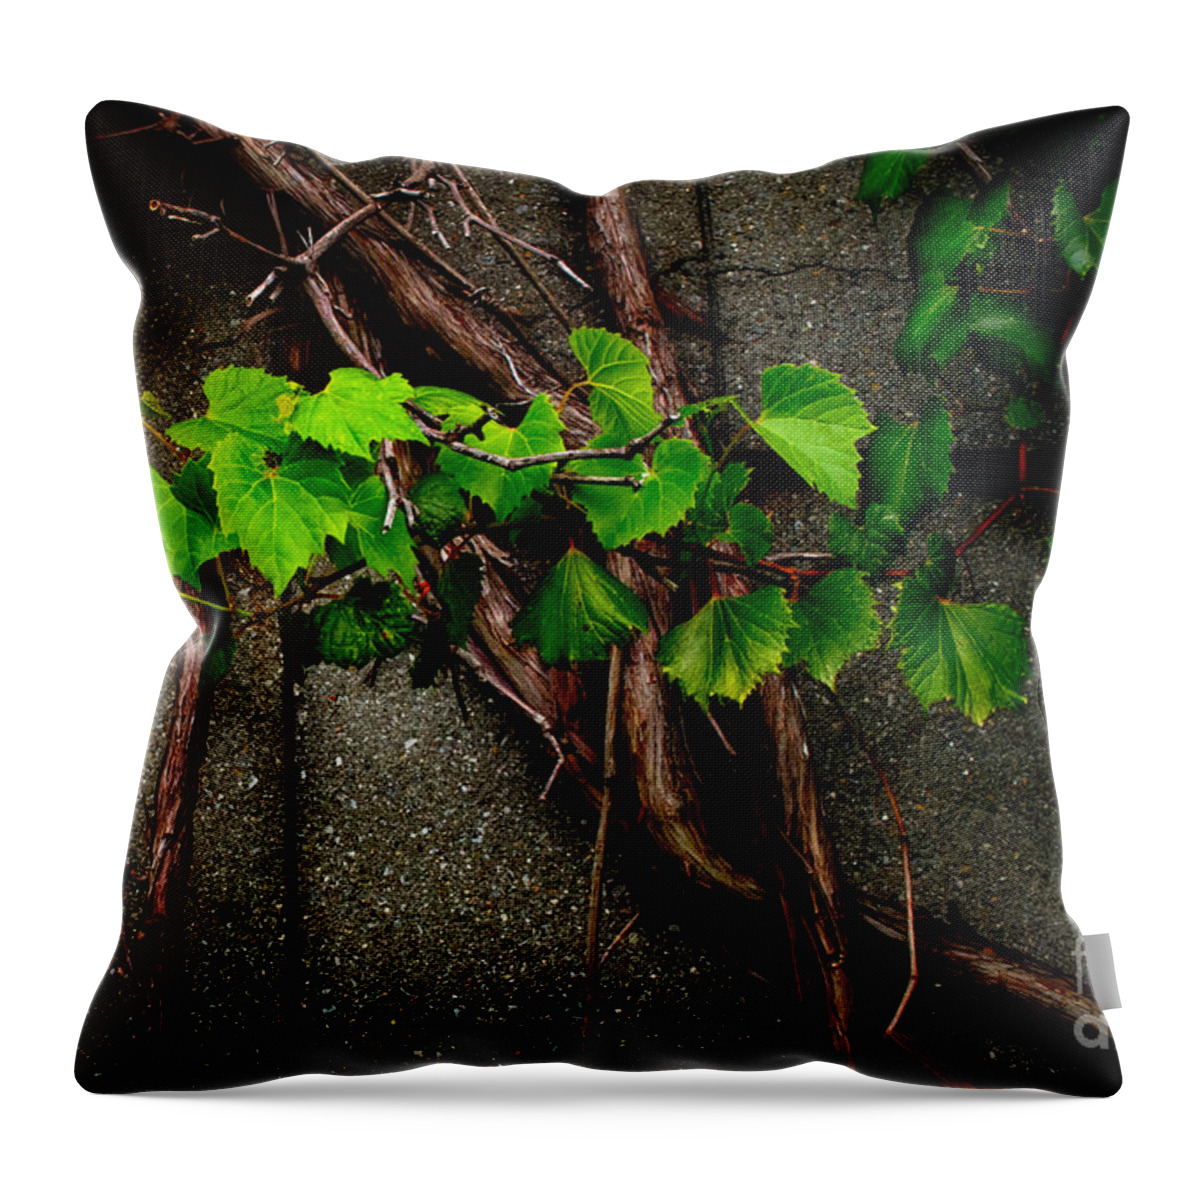 Barn Throw Pillow featuring the photograph Wild Grape Vine by Michael Arend